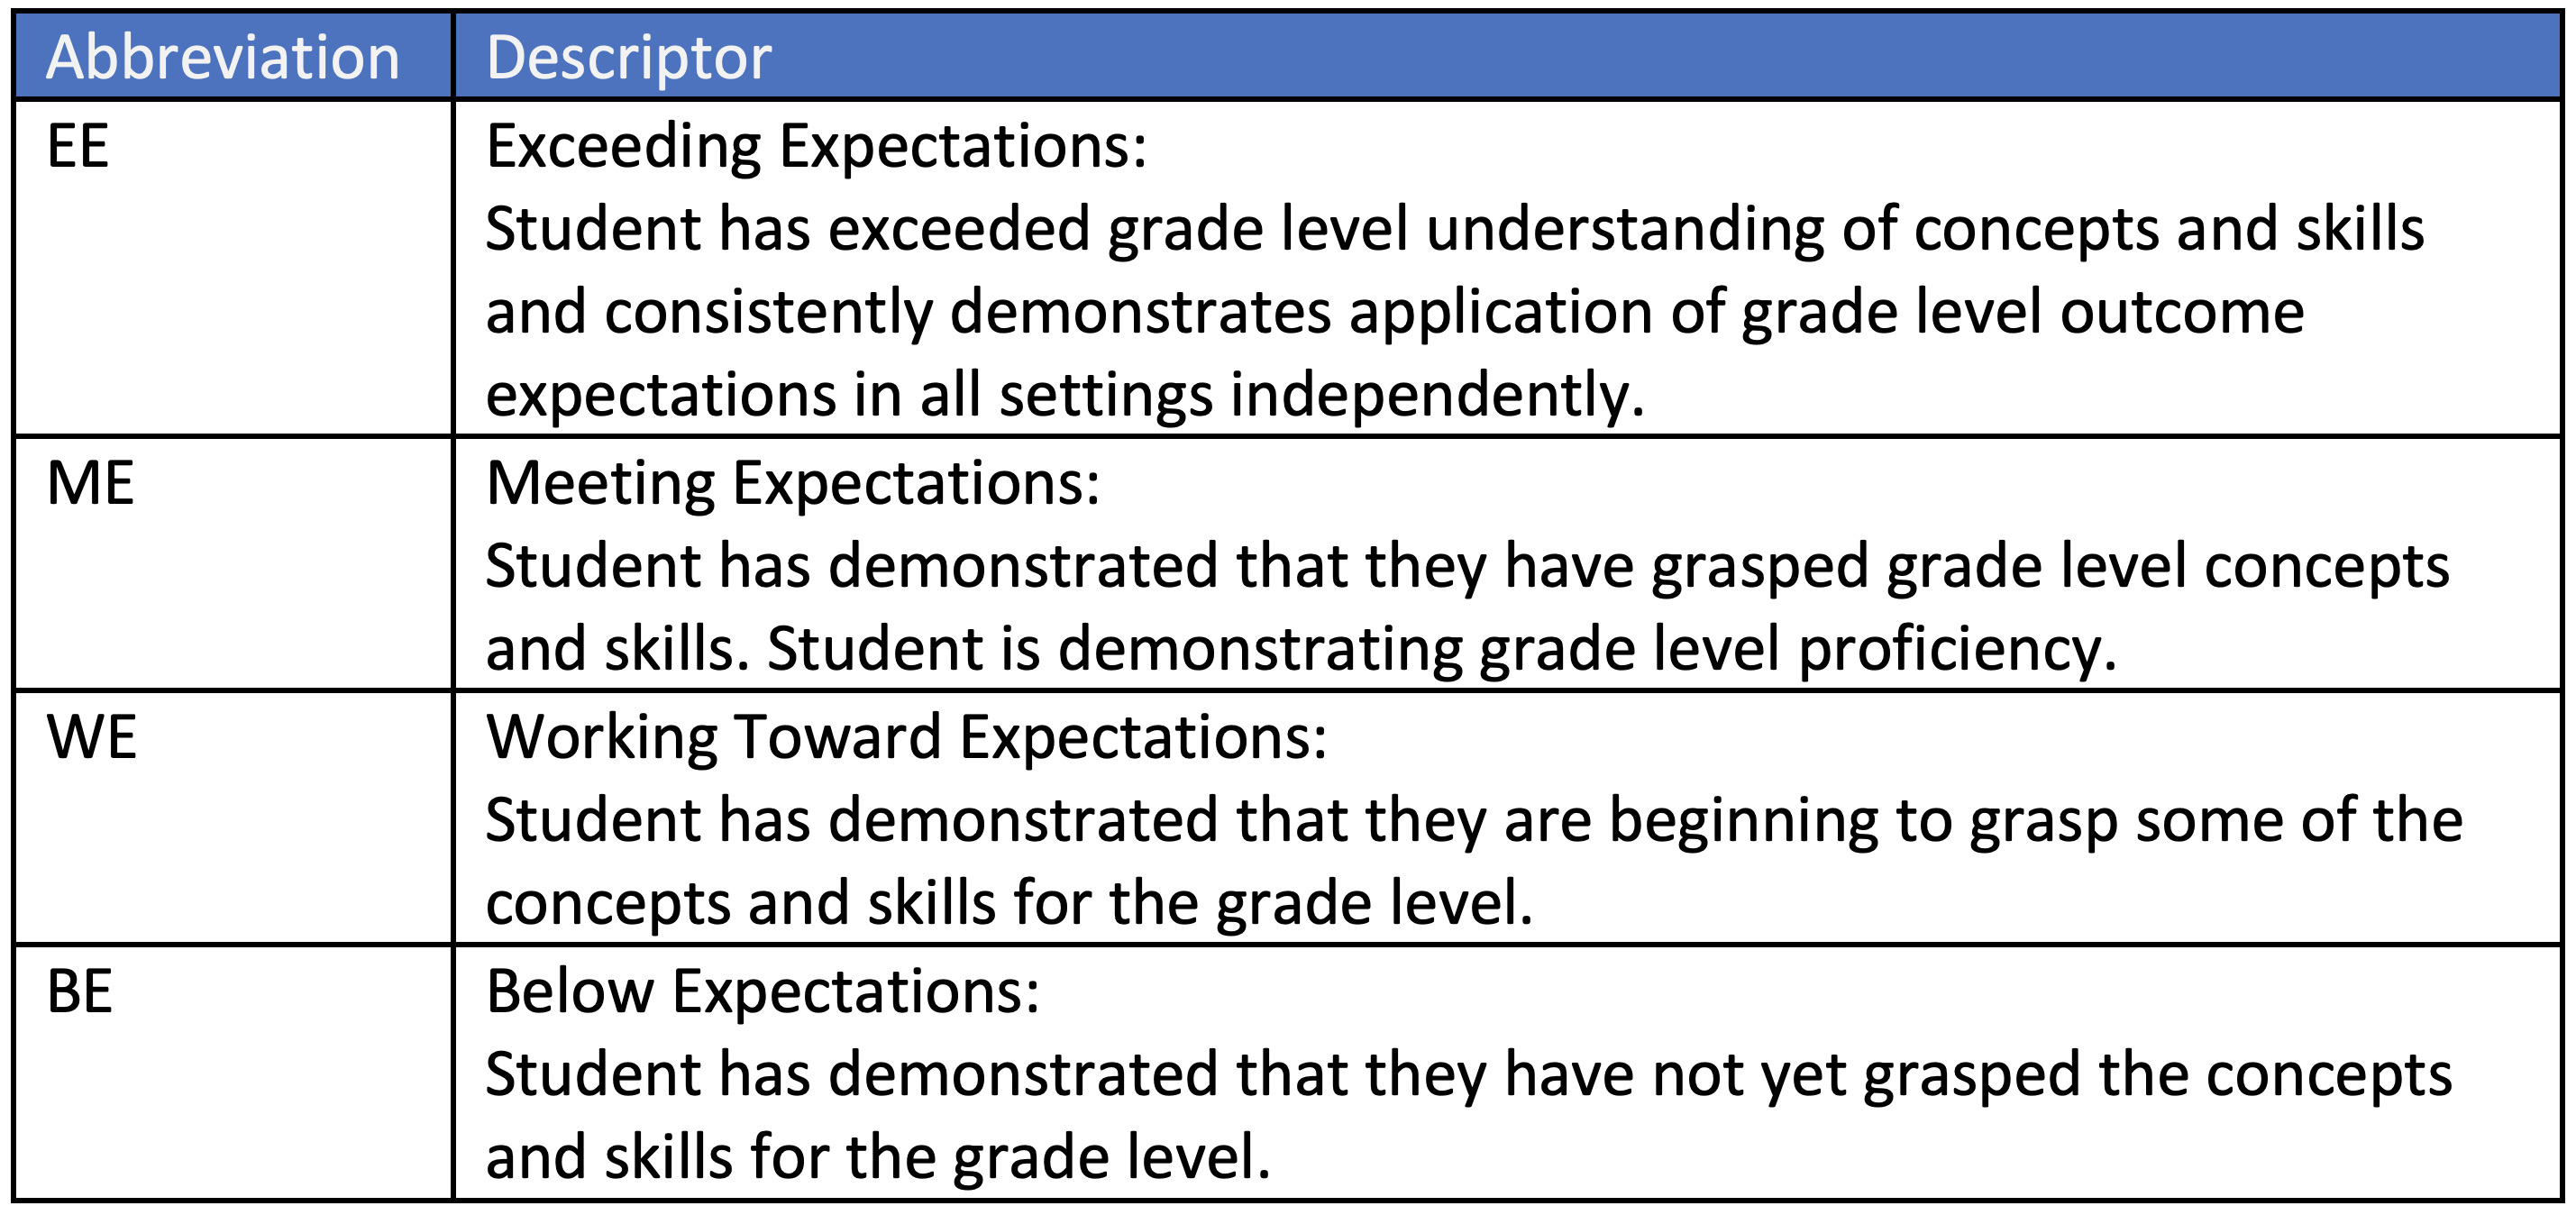 Assessment in the Primary Years Program (PYP)